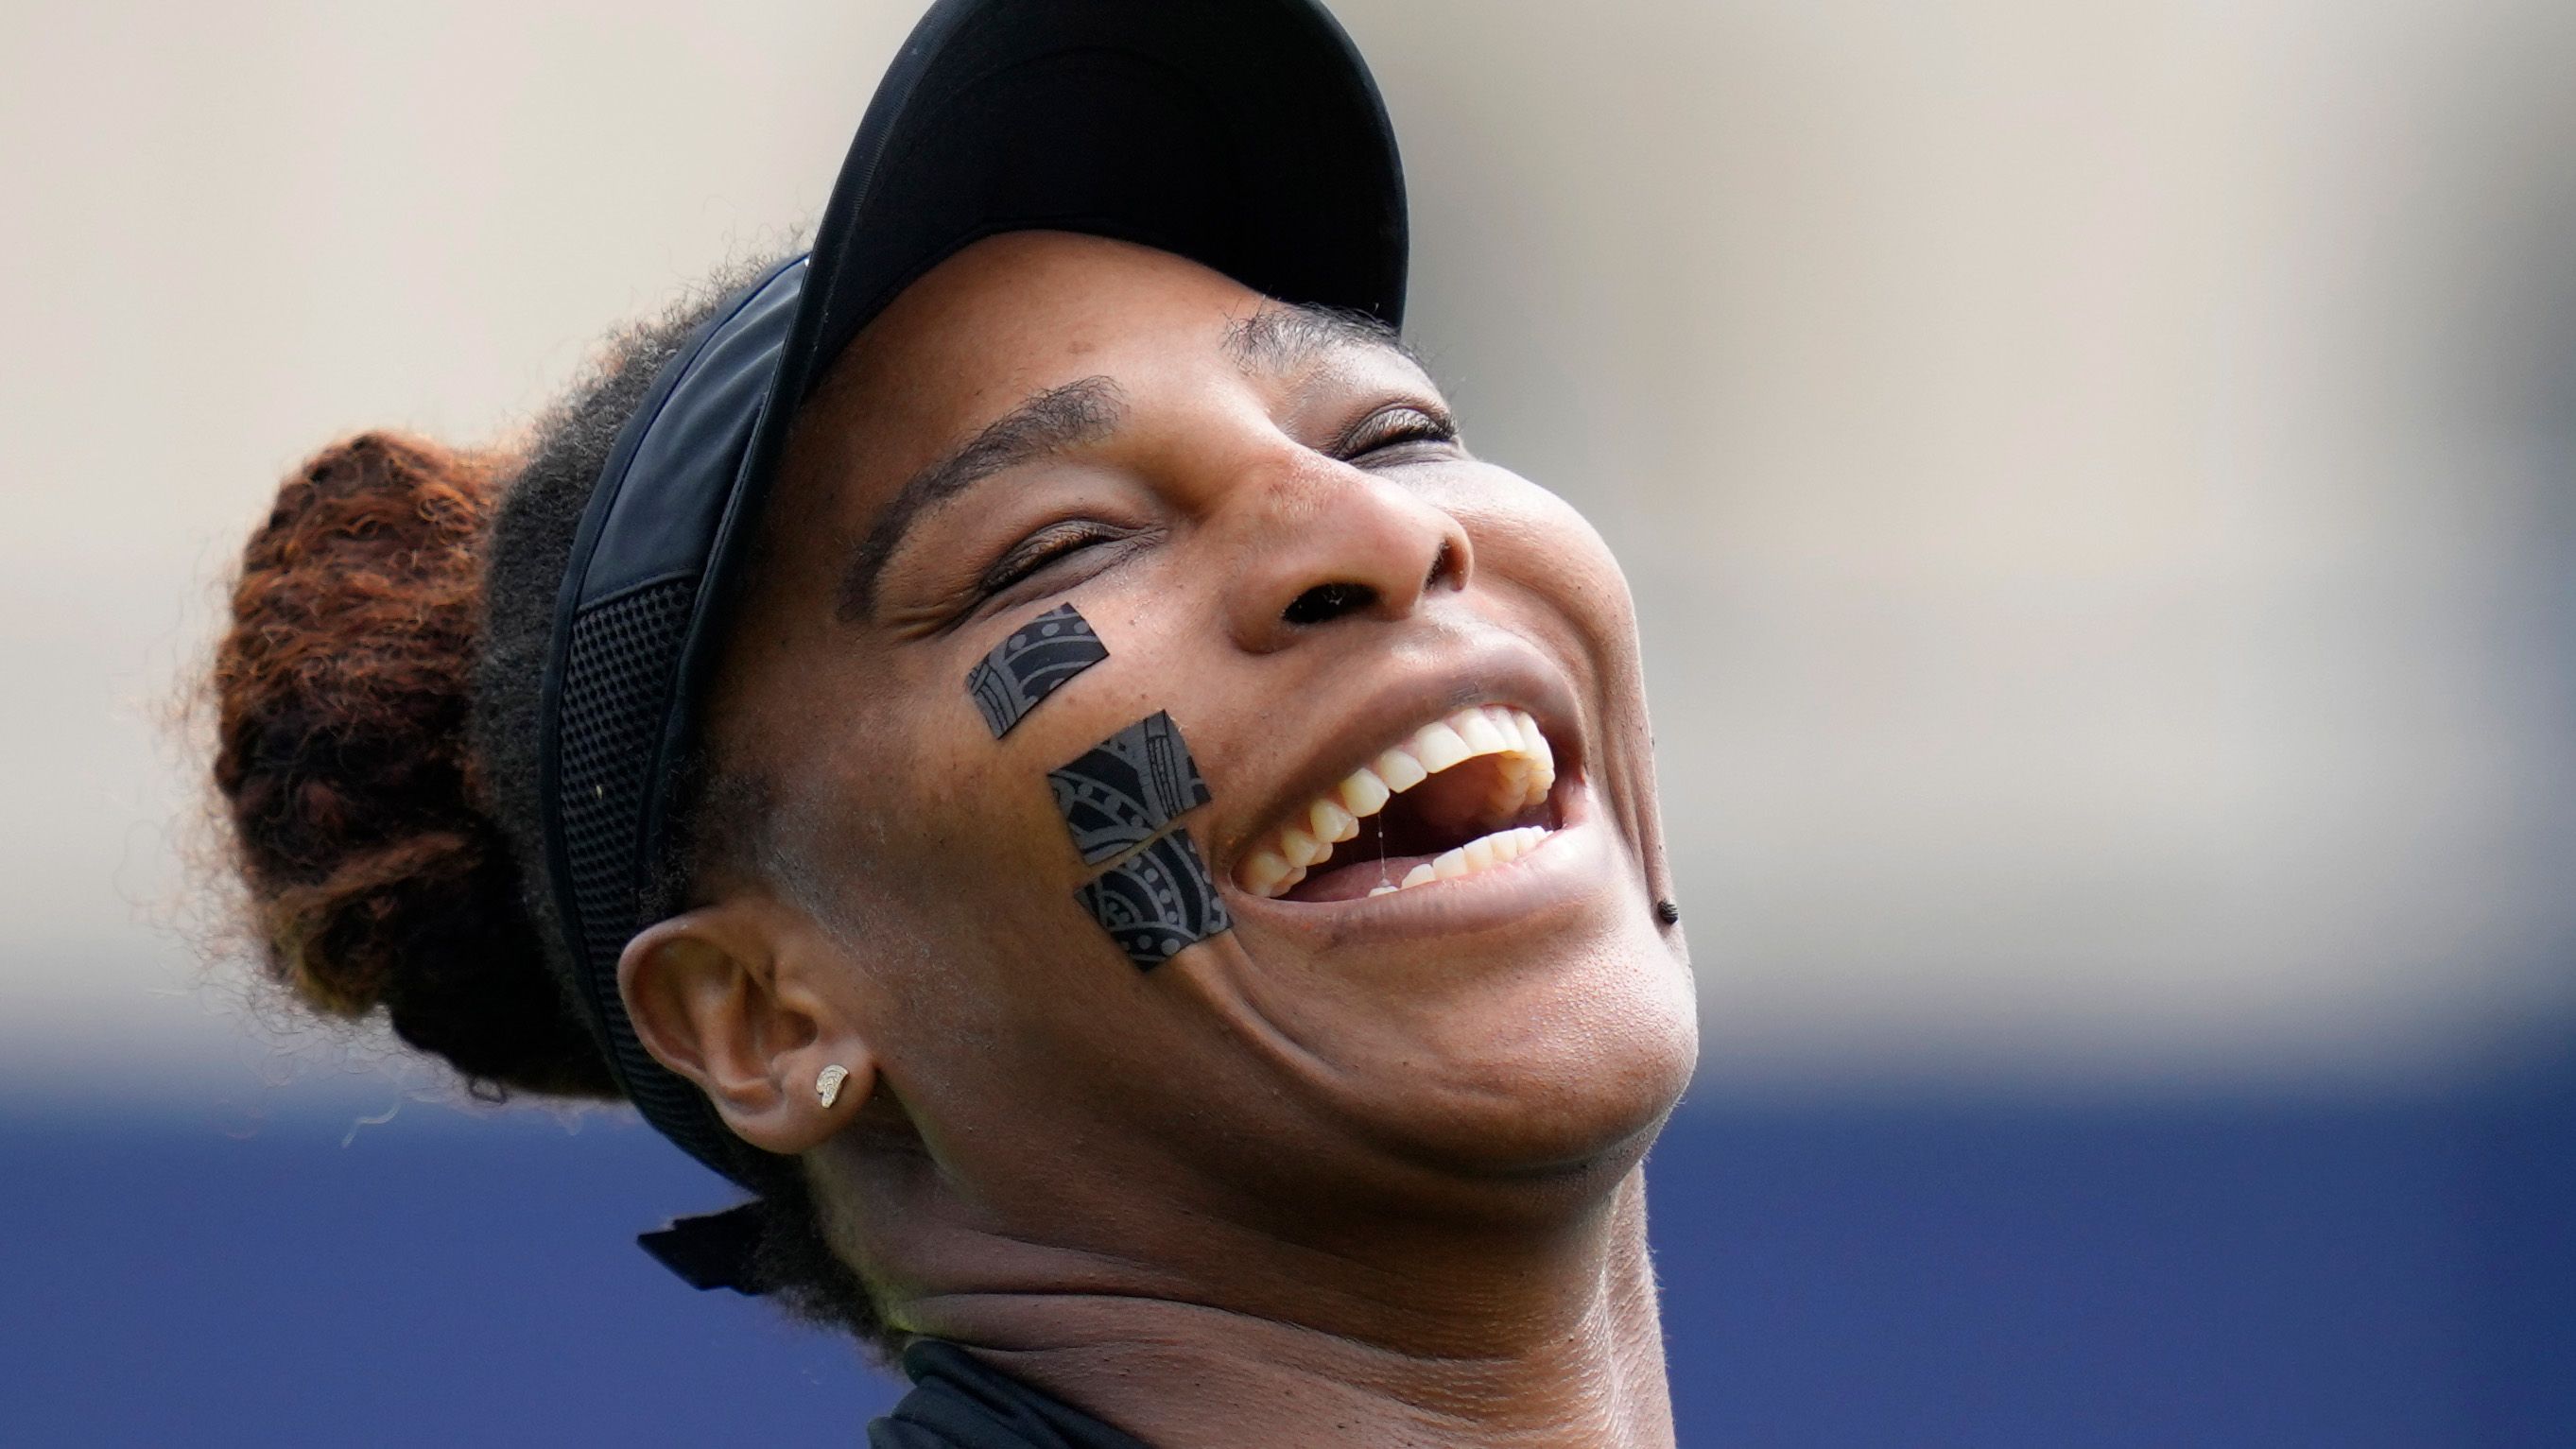 Now ranked 1204 in the world, Serena Williams wins on tennis comeback